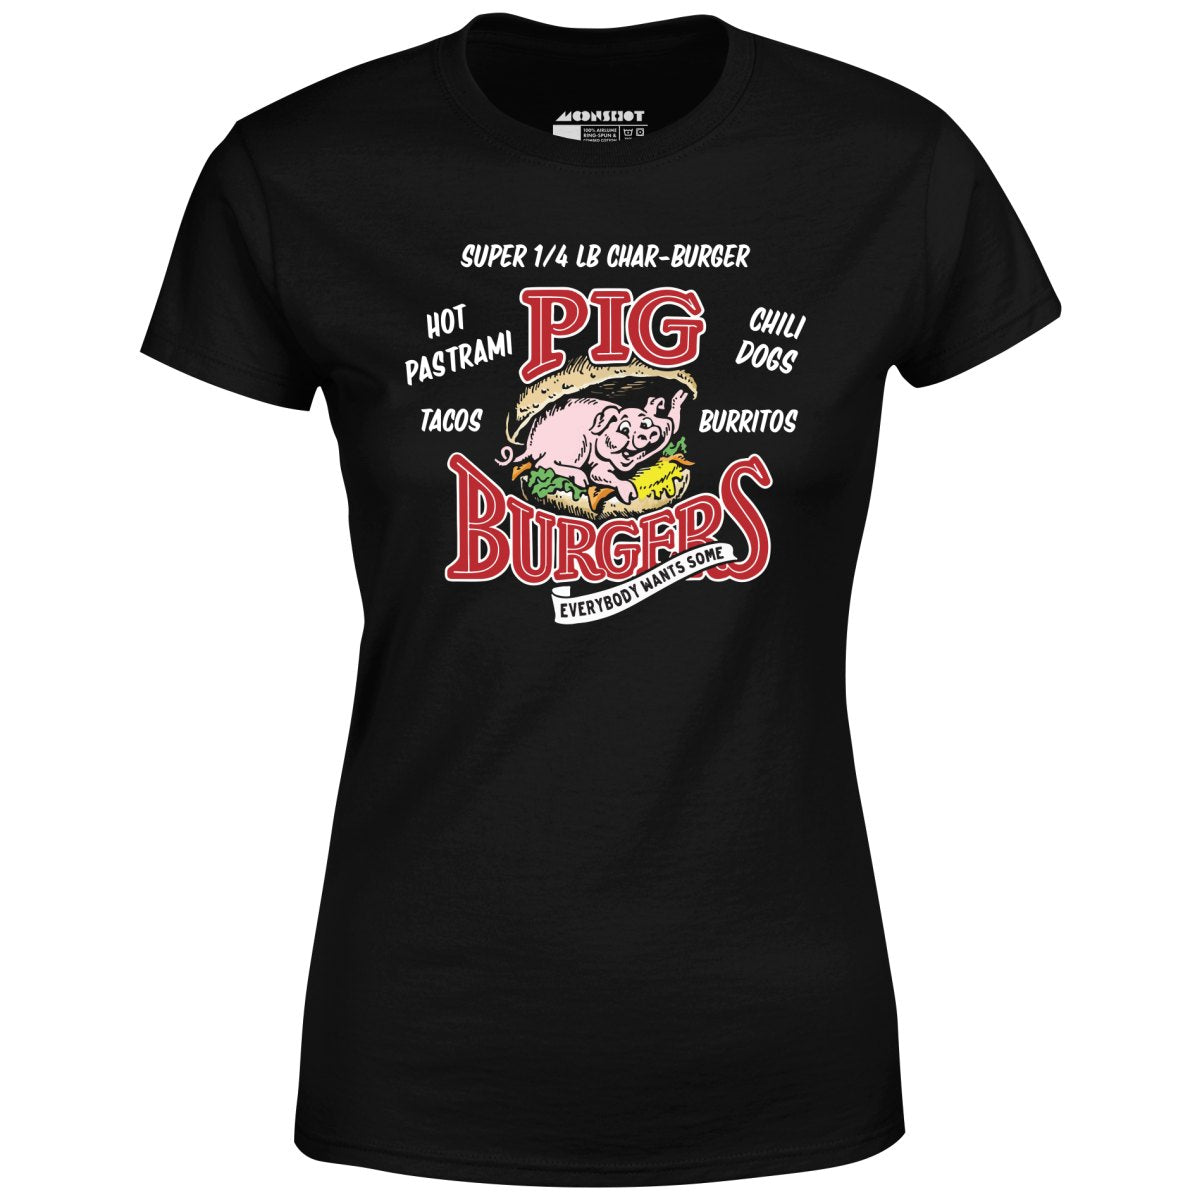 Pig Burgers - Everybody Wants Some - Women's T-Shirt